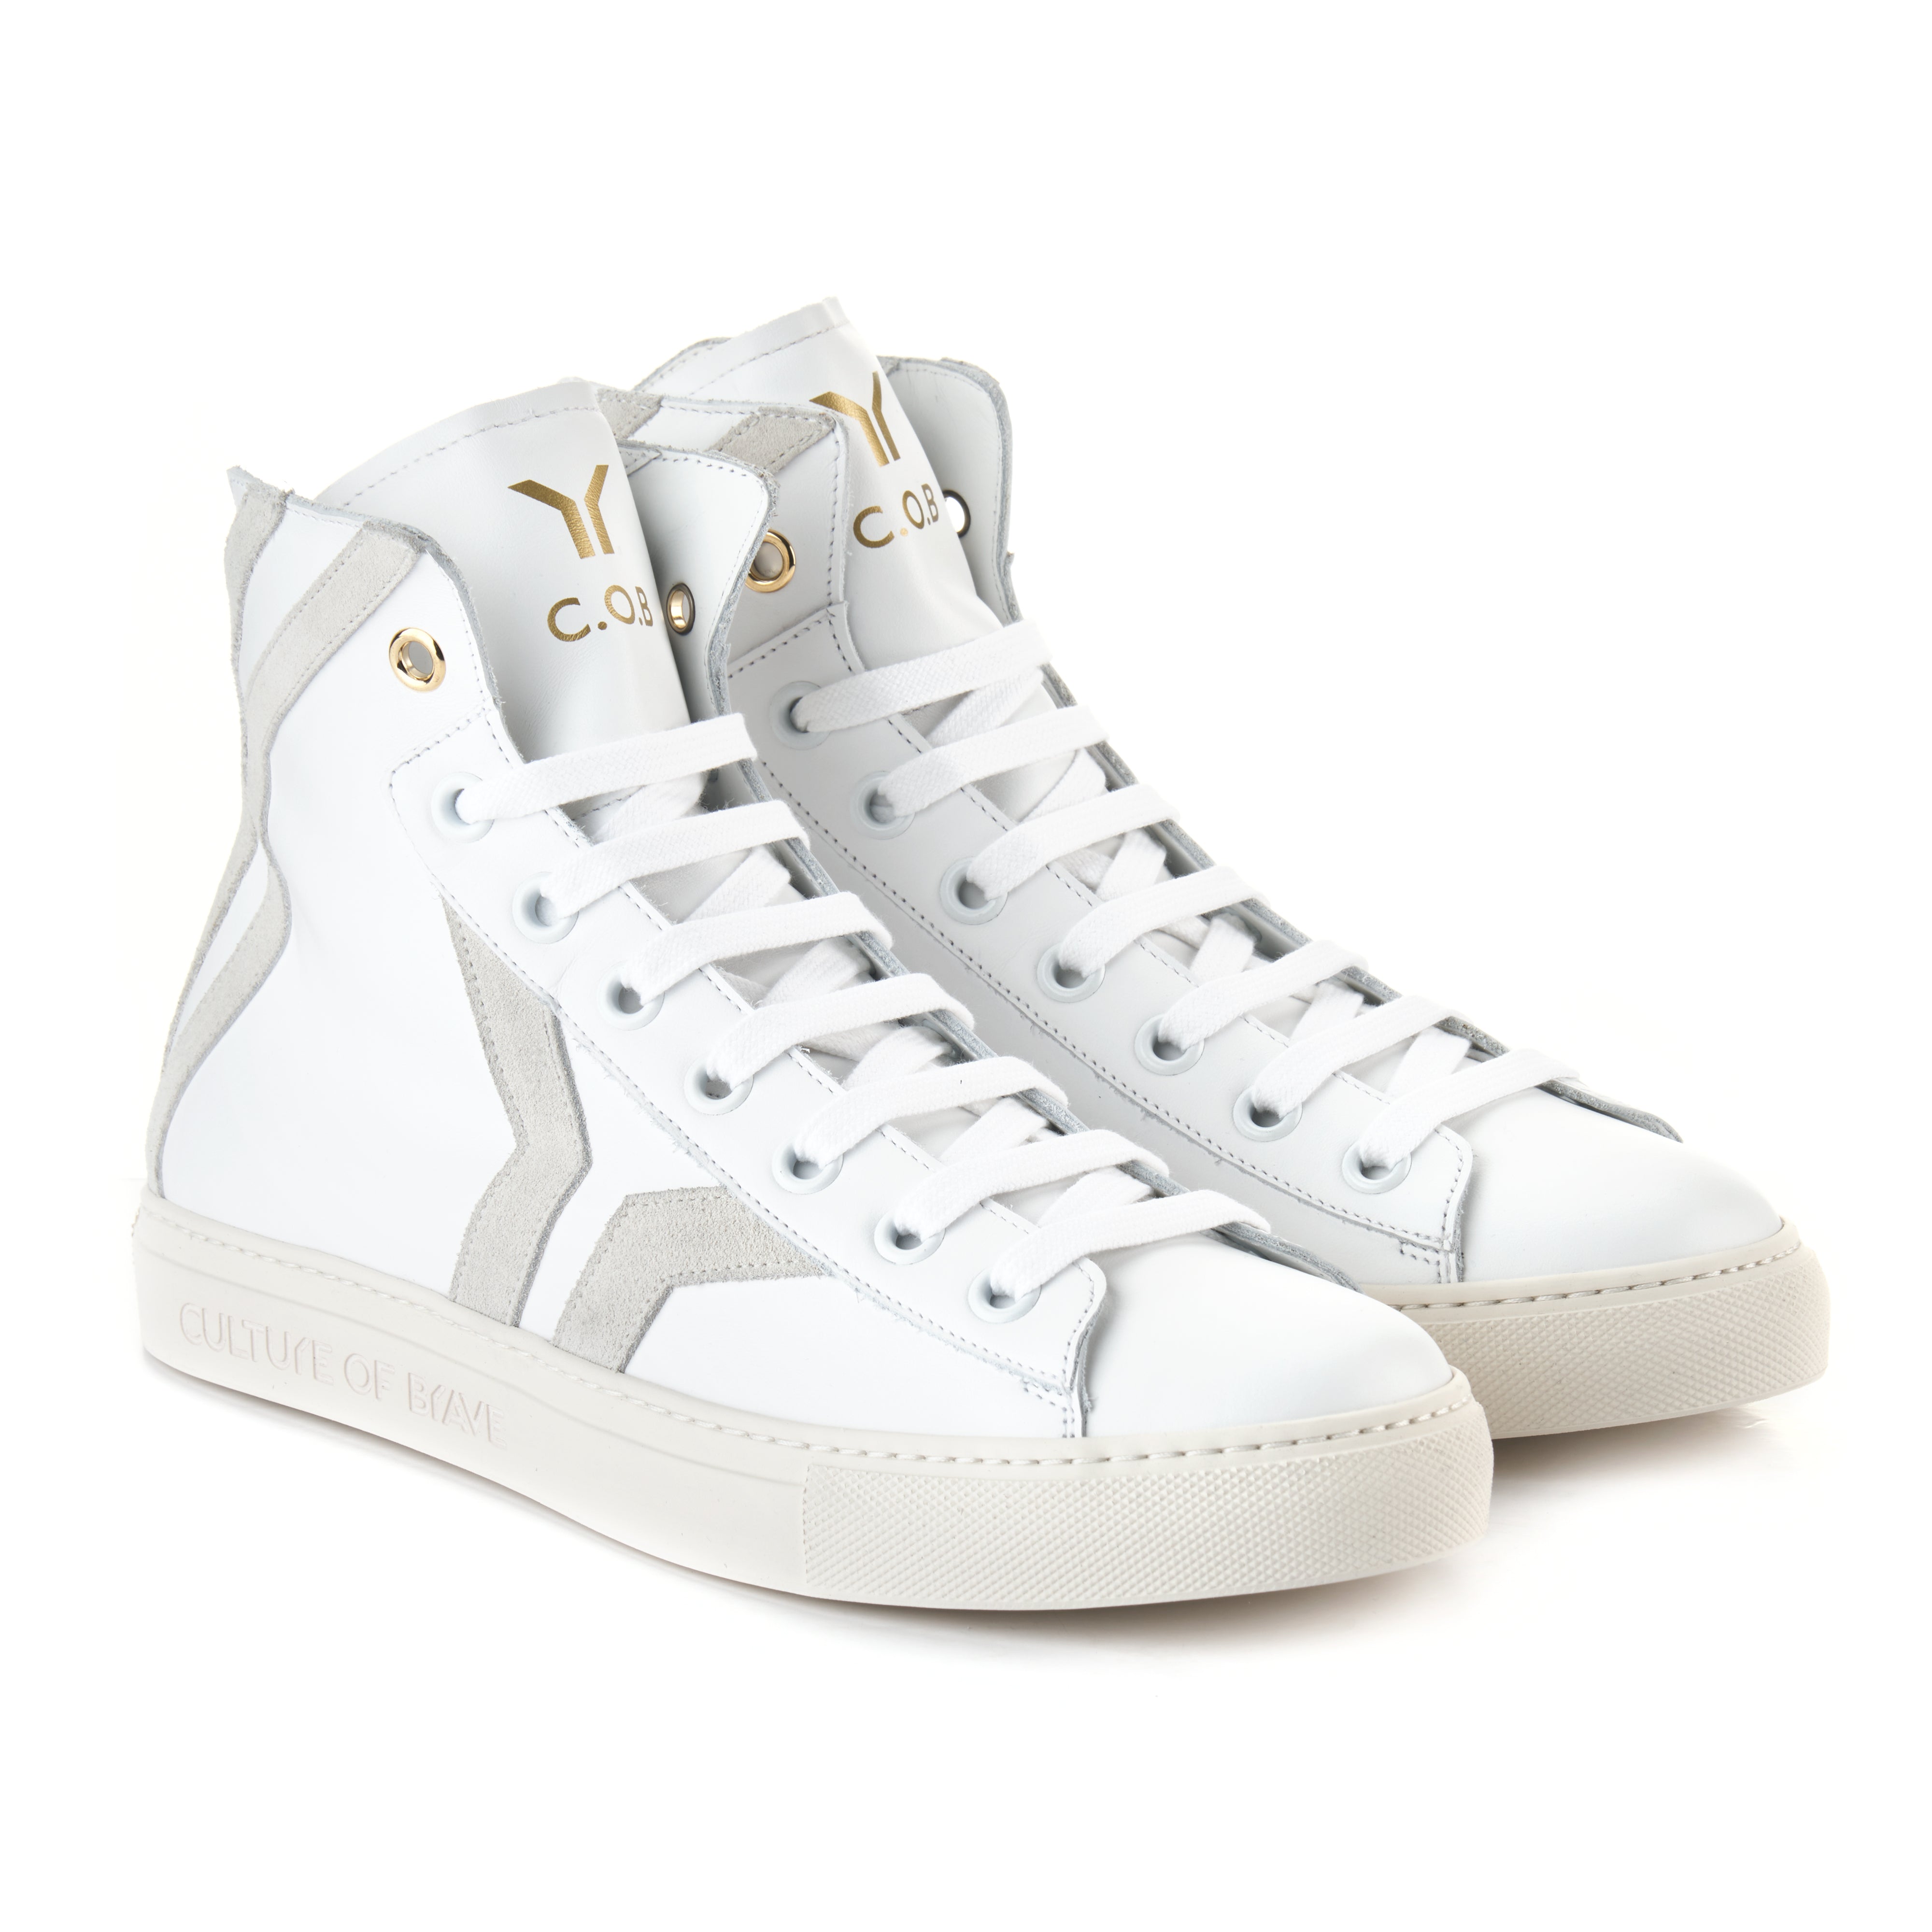 Resilient S17 Women White leather offwhite wing mid cut